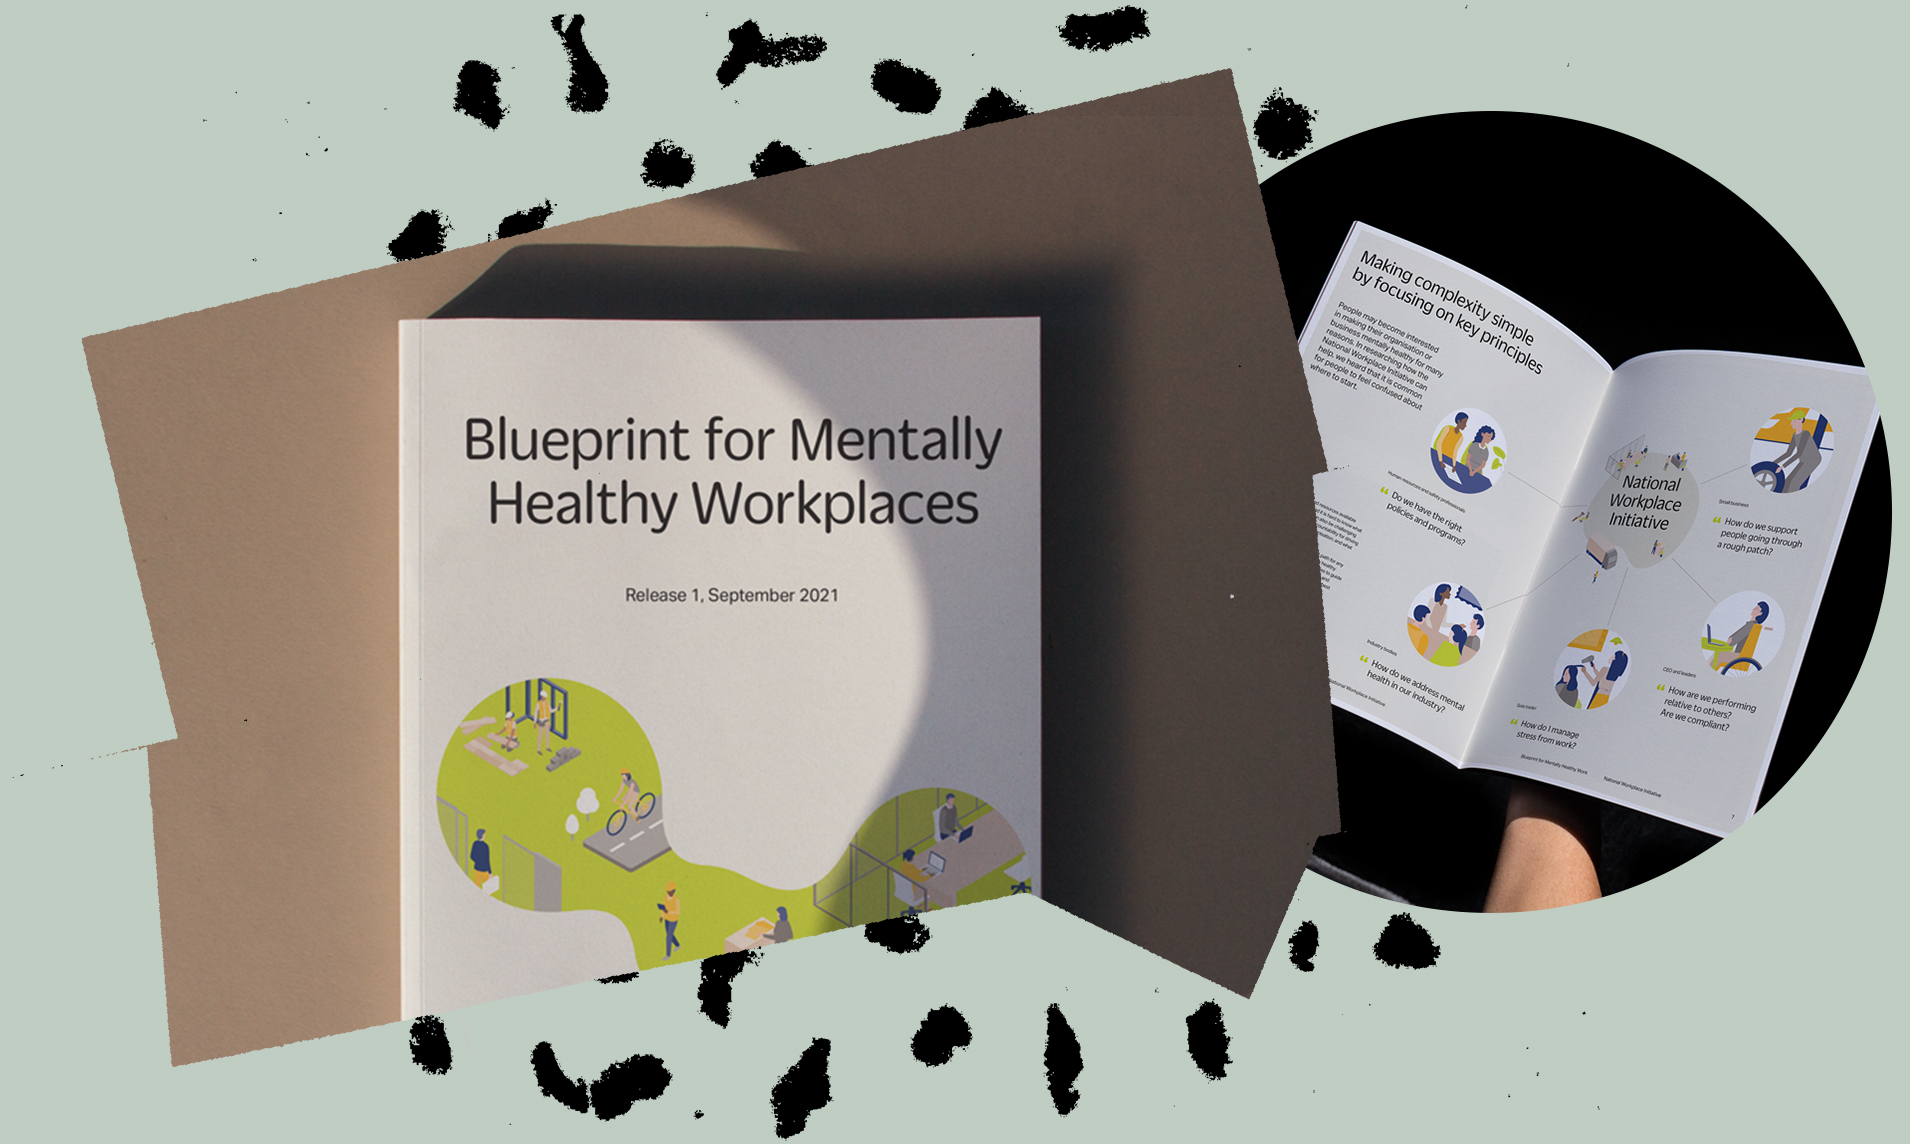 Blueprint for Mentally Healthy Workplaces is released!